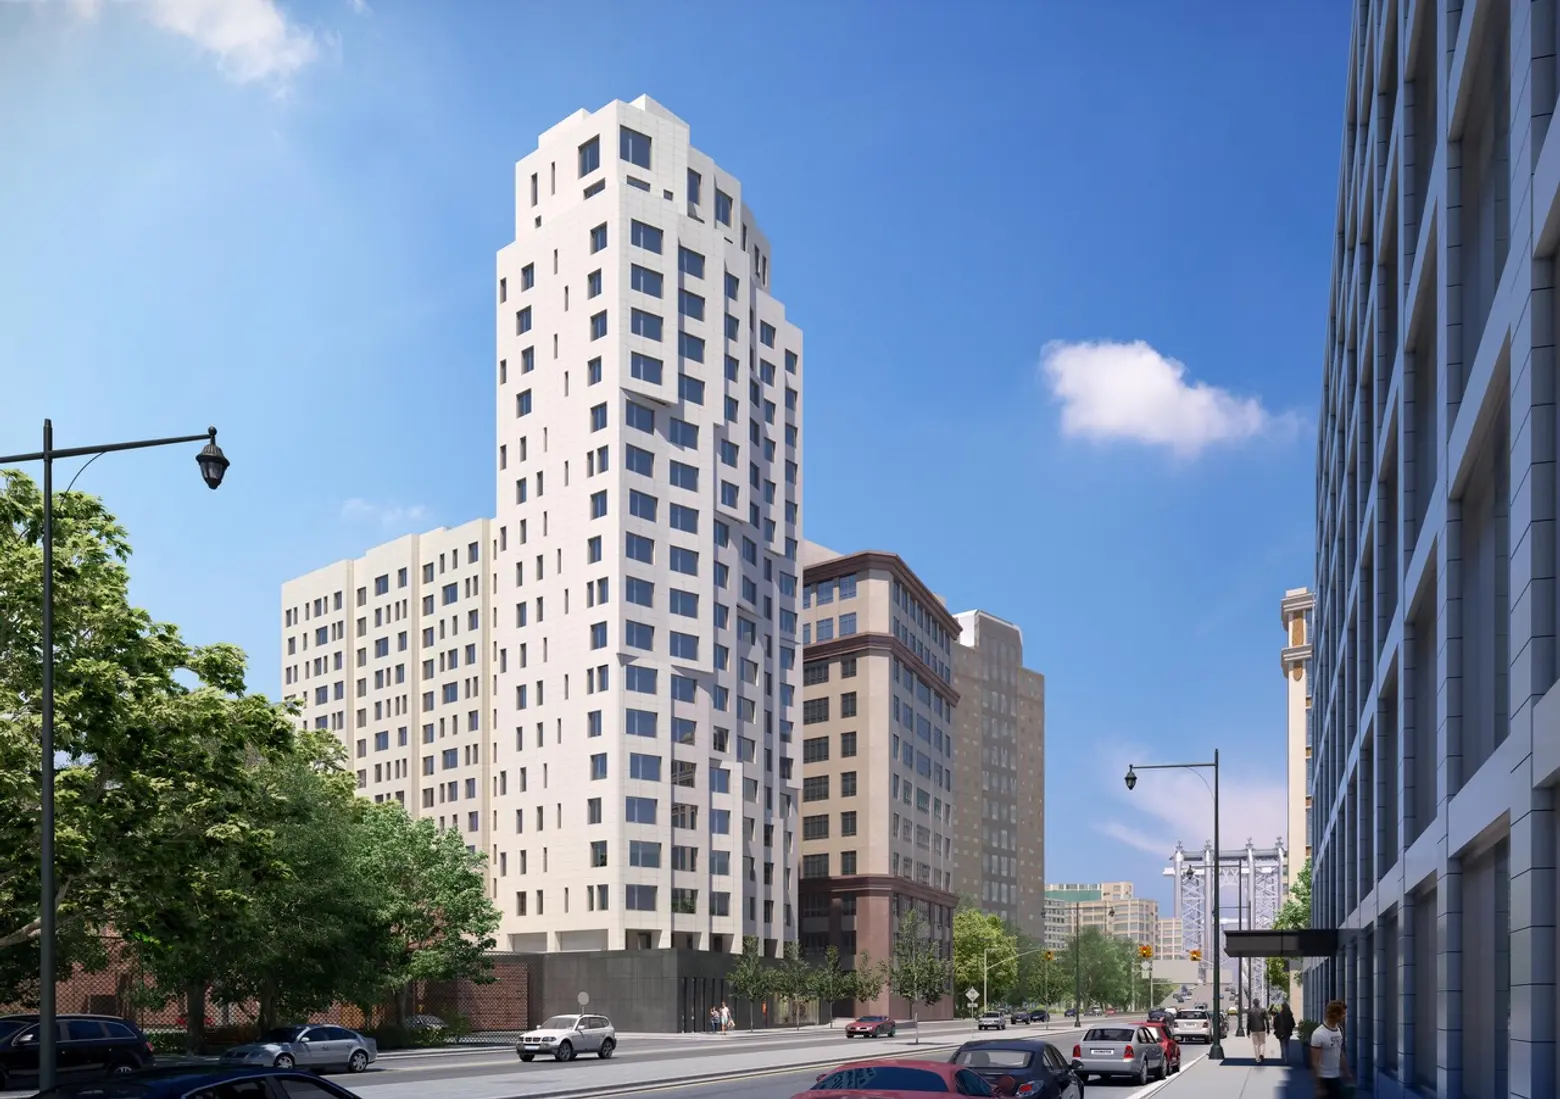 55 middle-income units available at CetraRuddy’s new Downtown Brooklyn tower, from $2,307/month